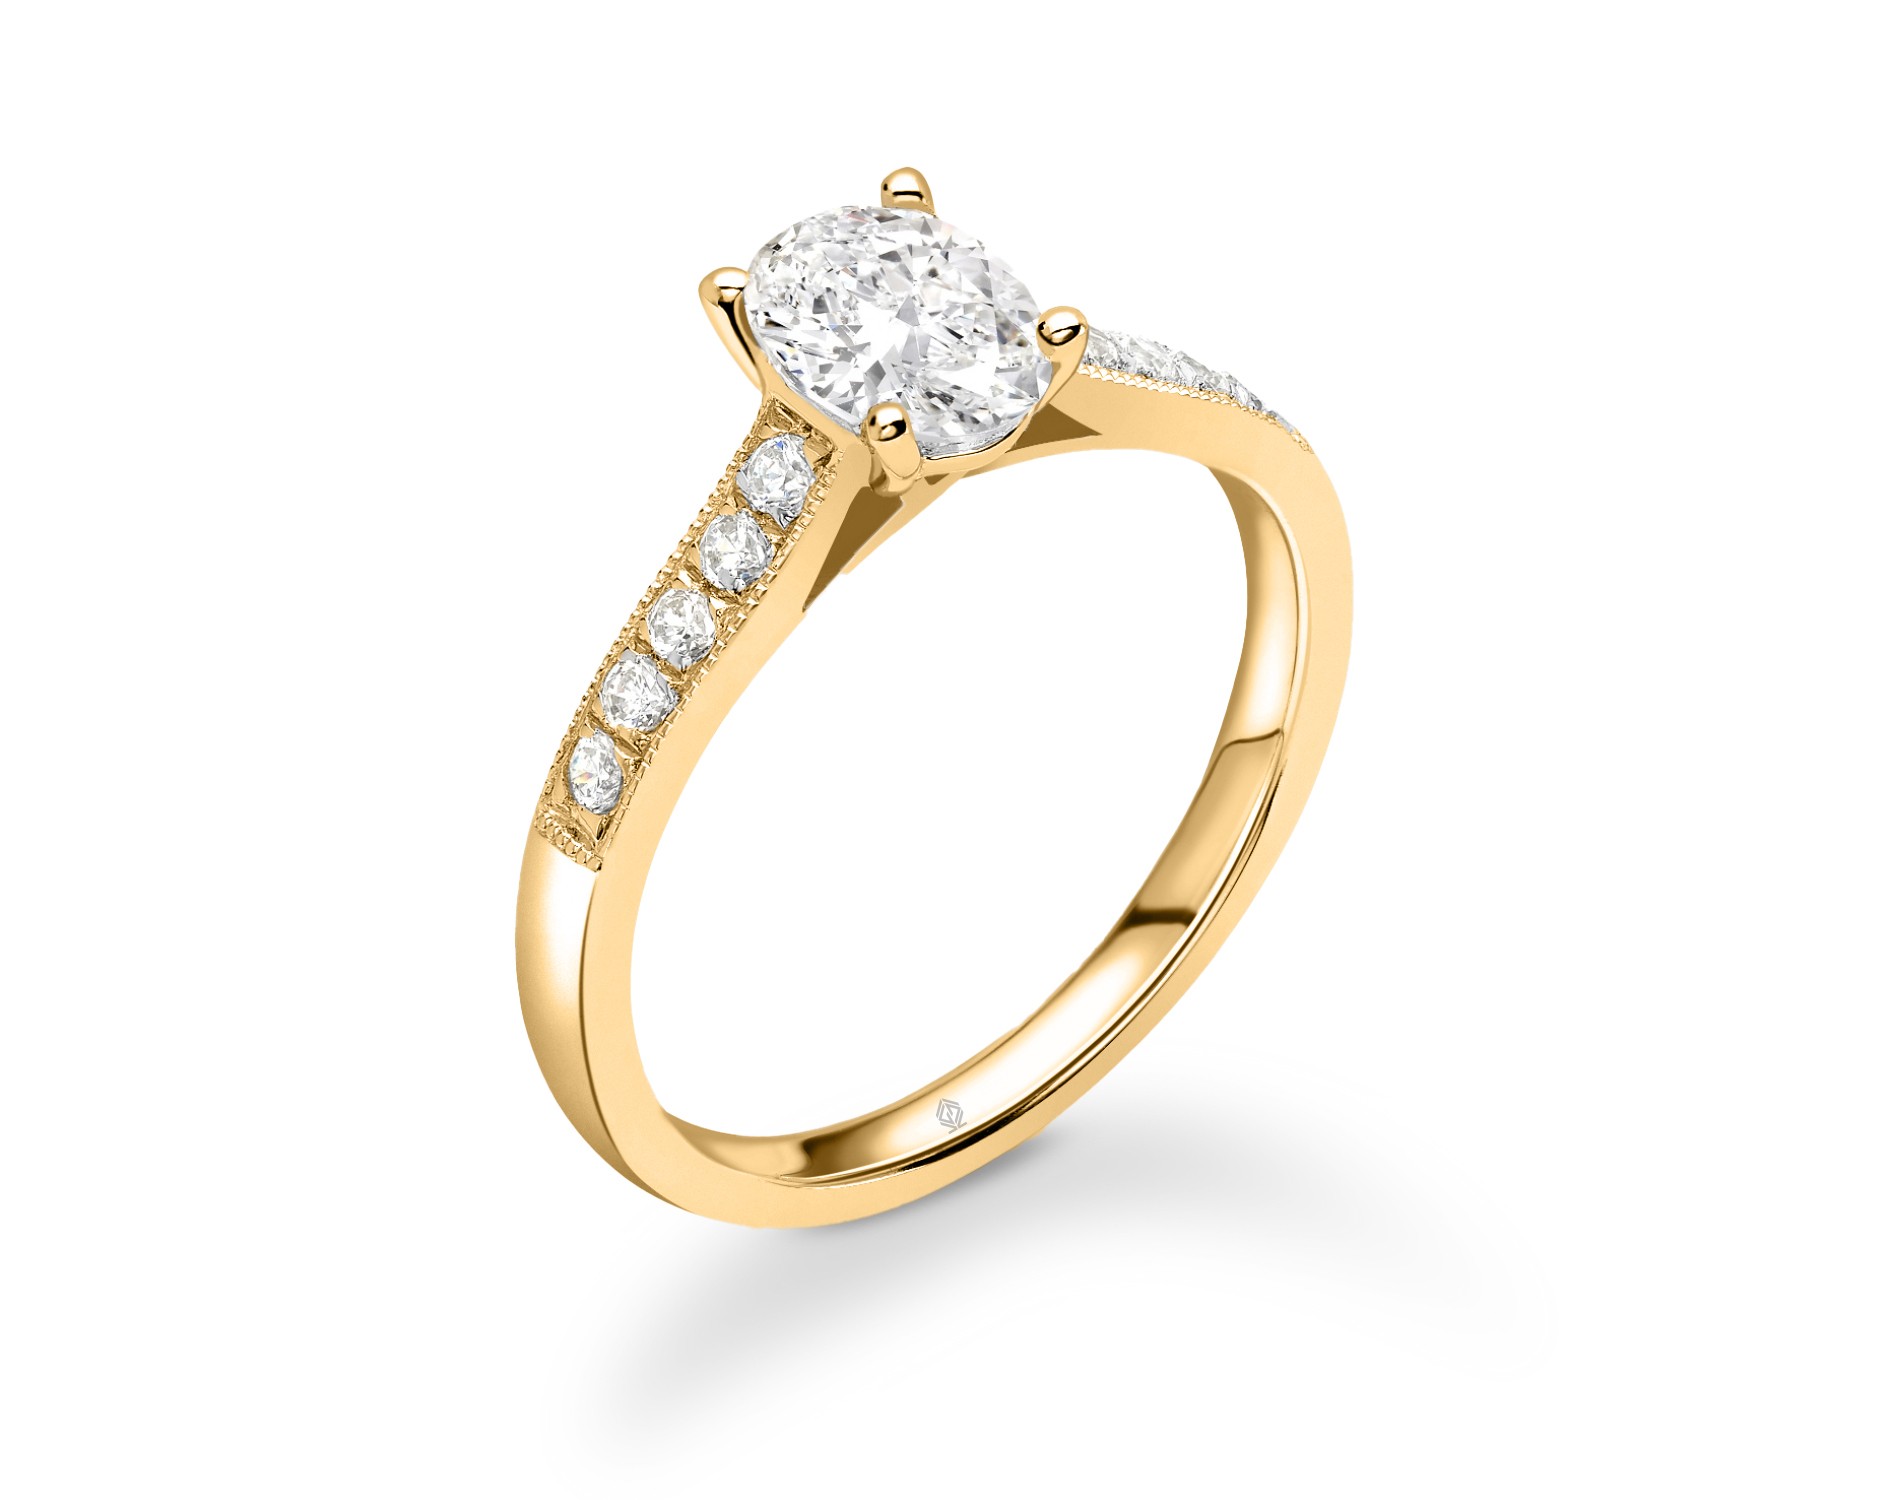 18K YELLOW GOLD OVAL CUT DIAMOND ENGAGEMENT RING WITH SIDE STONES MILGRAIN CHANNEL SET